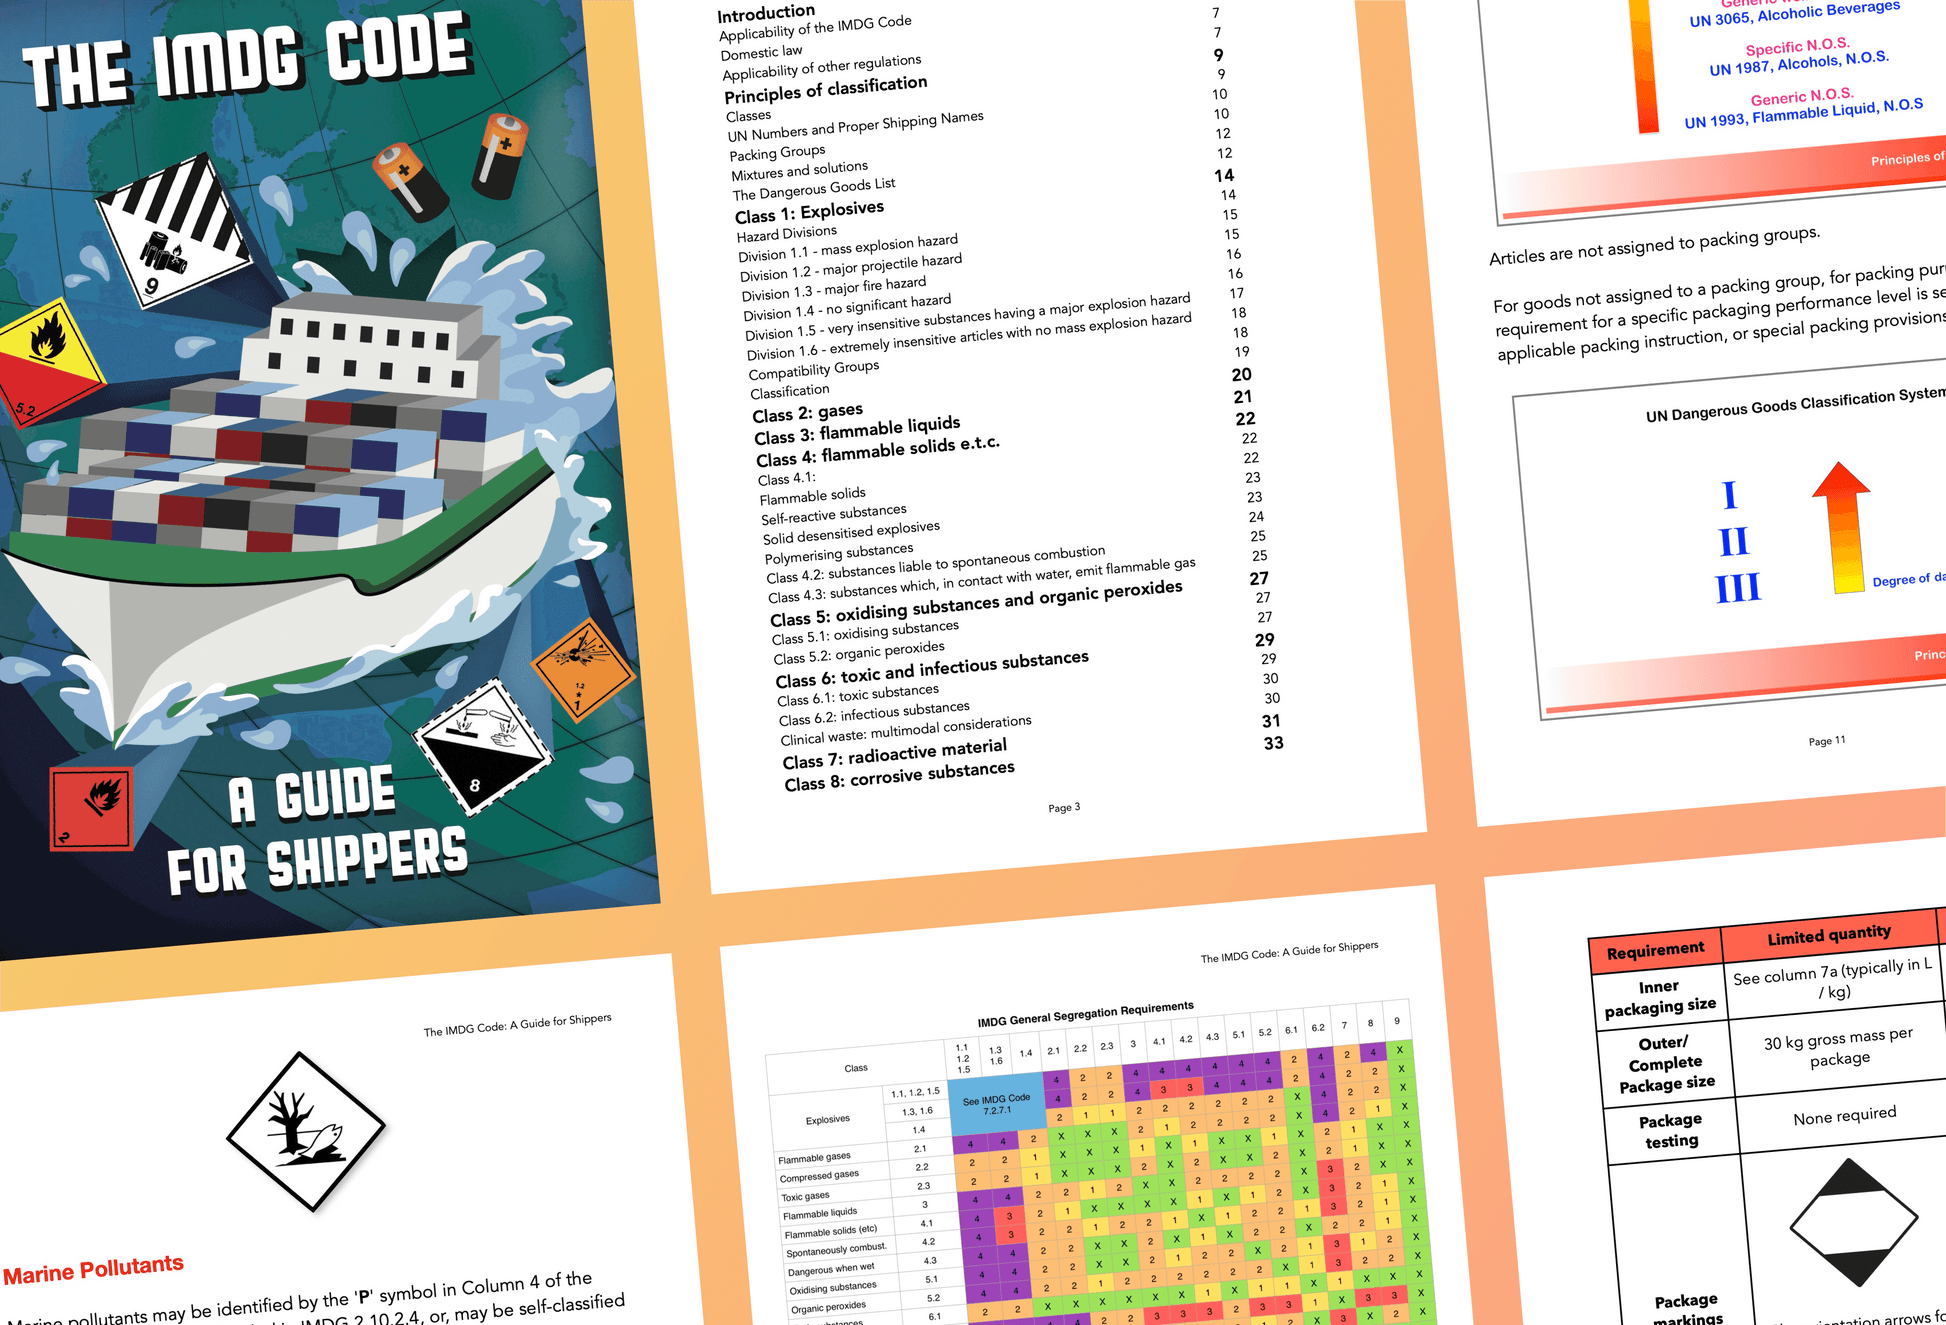 IMDG Code guide book manual contents